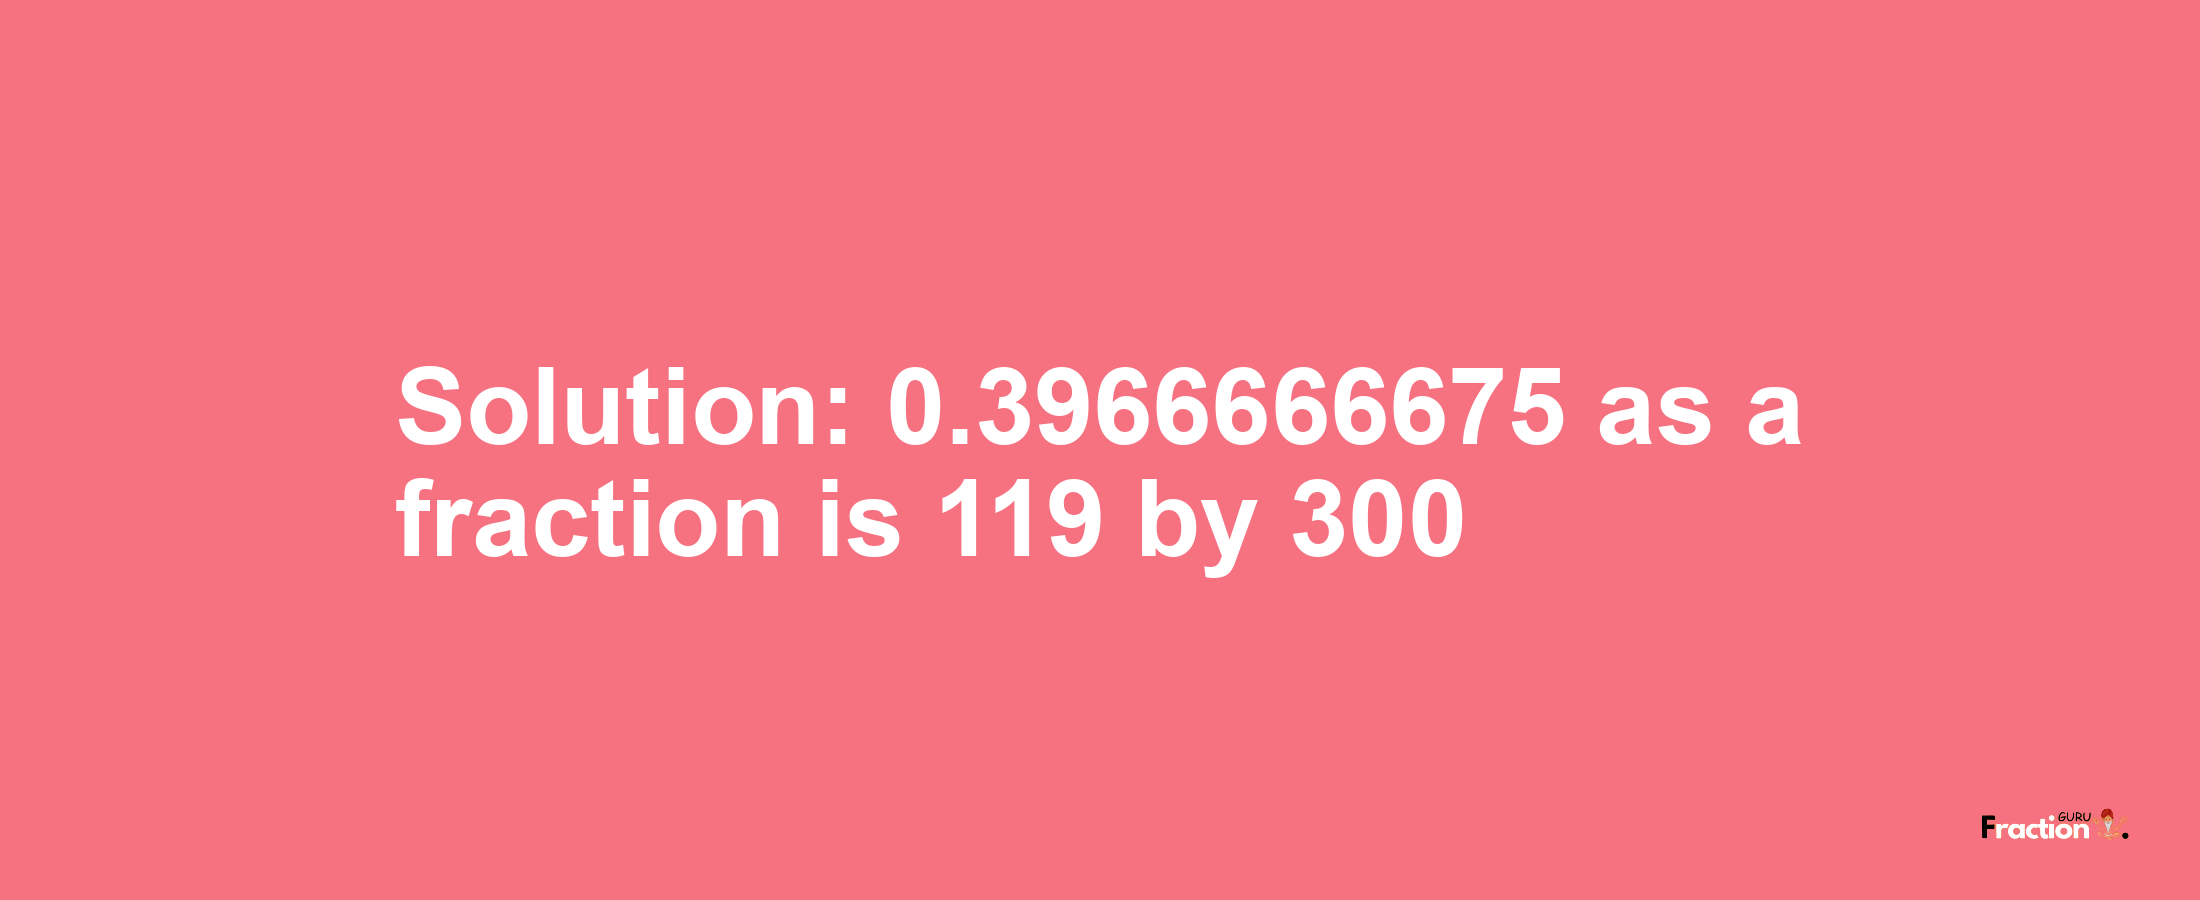 Solution:0.3966666675 as a fraction is 119/300